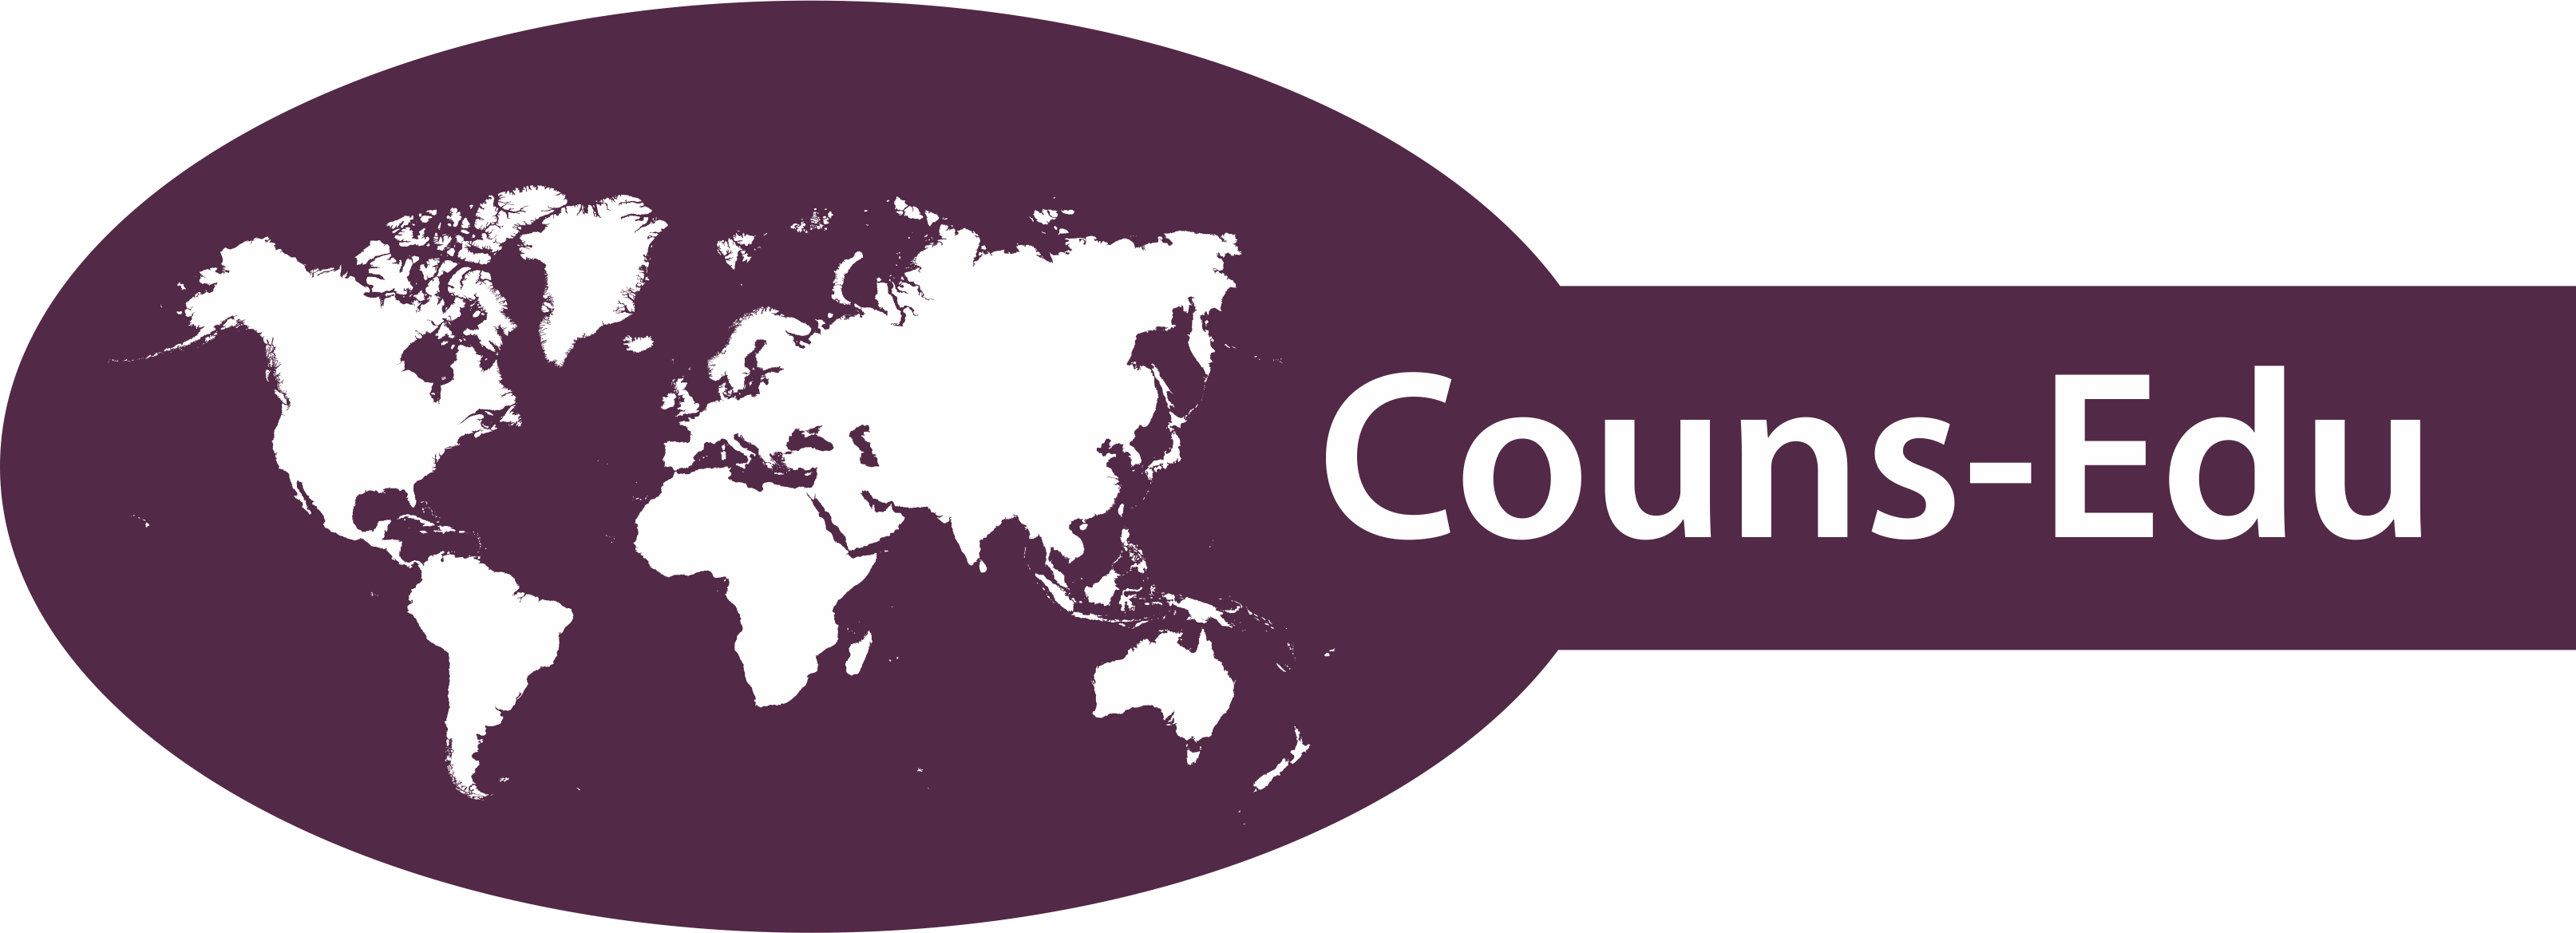 COUNS-EDU: The International Journal of Counseling and Education